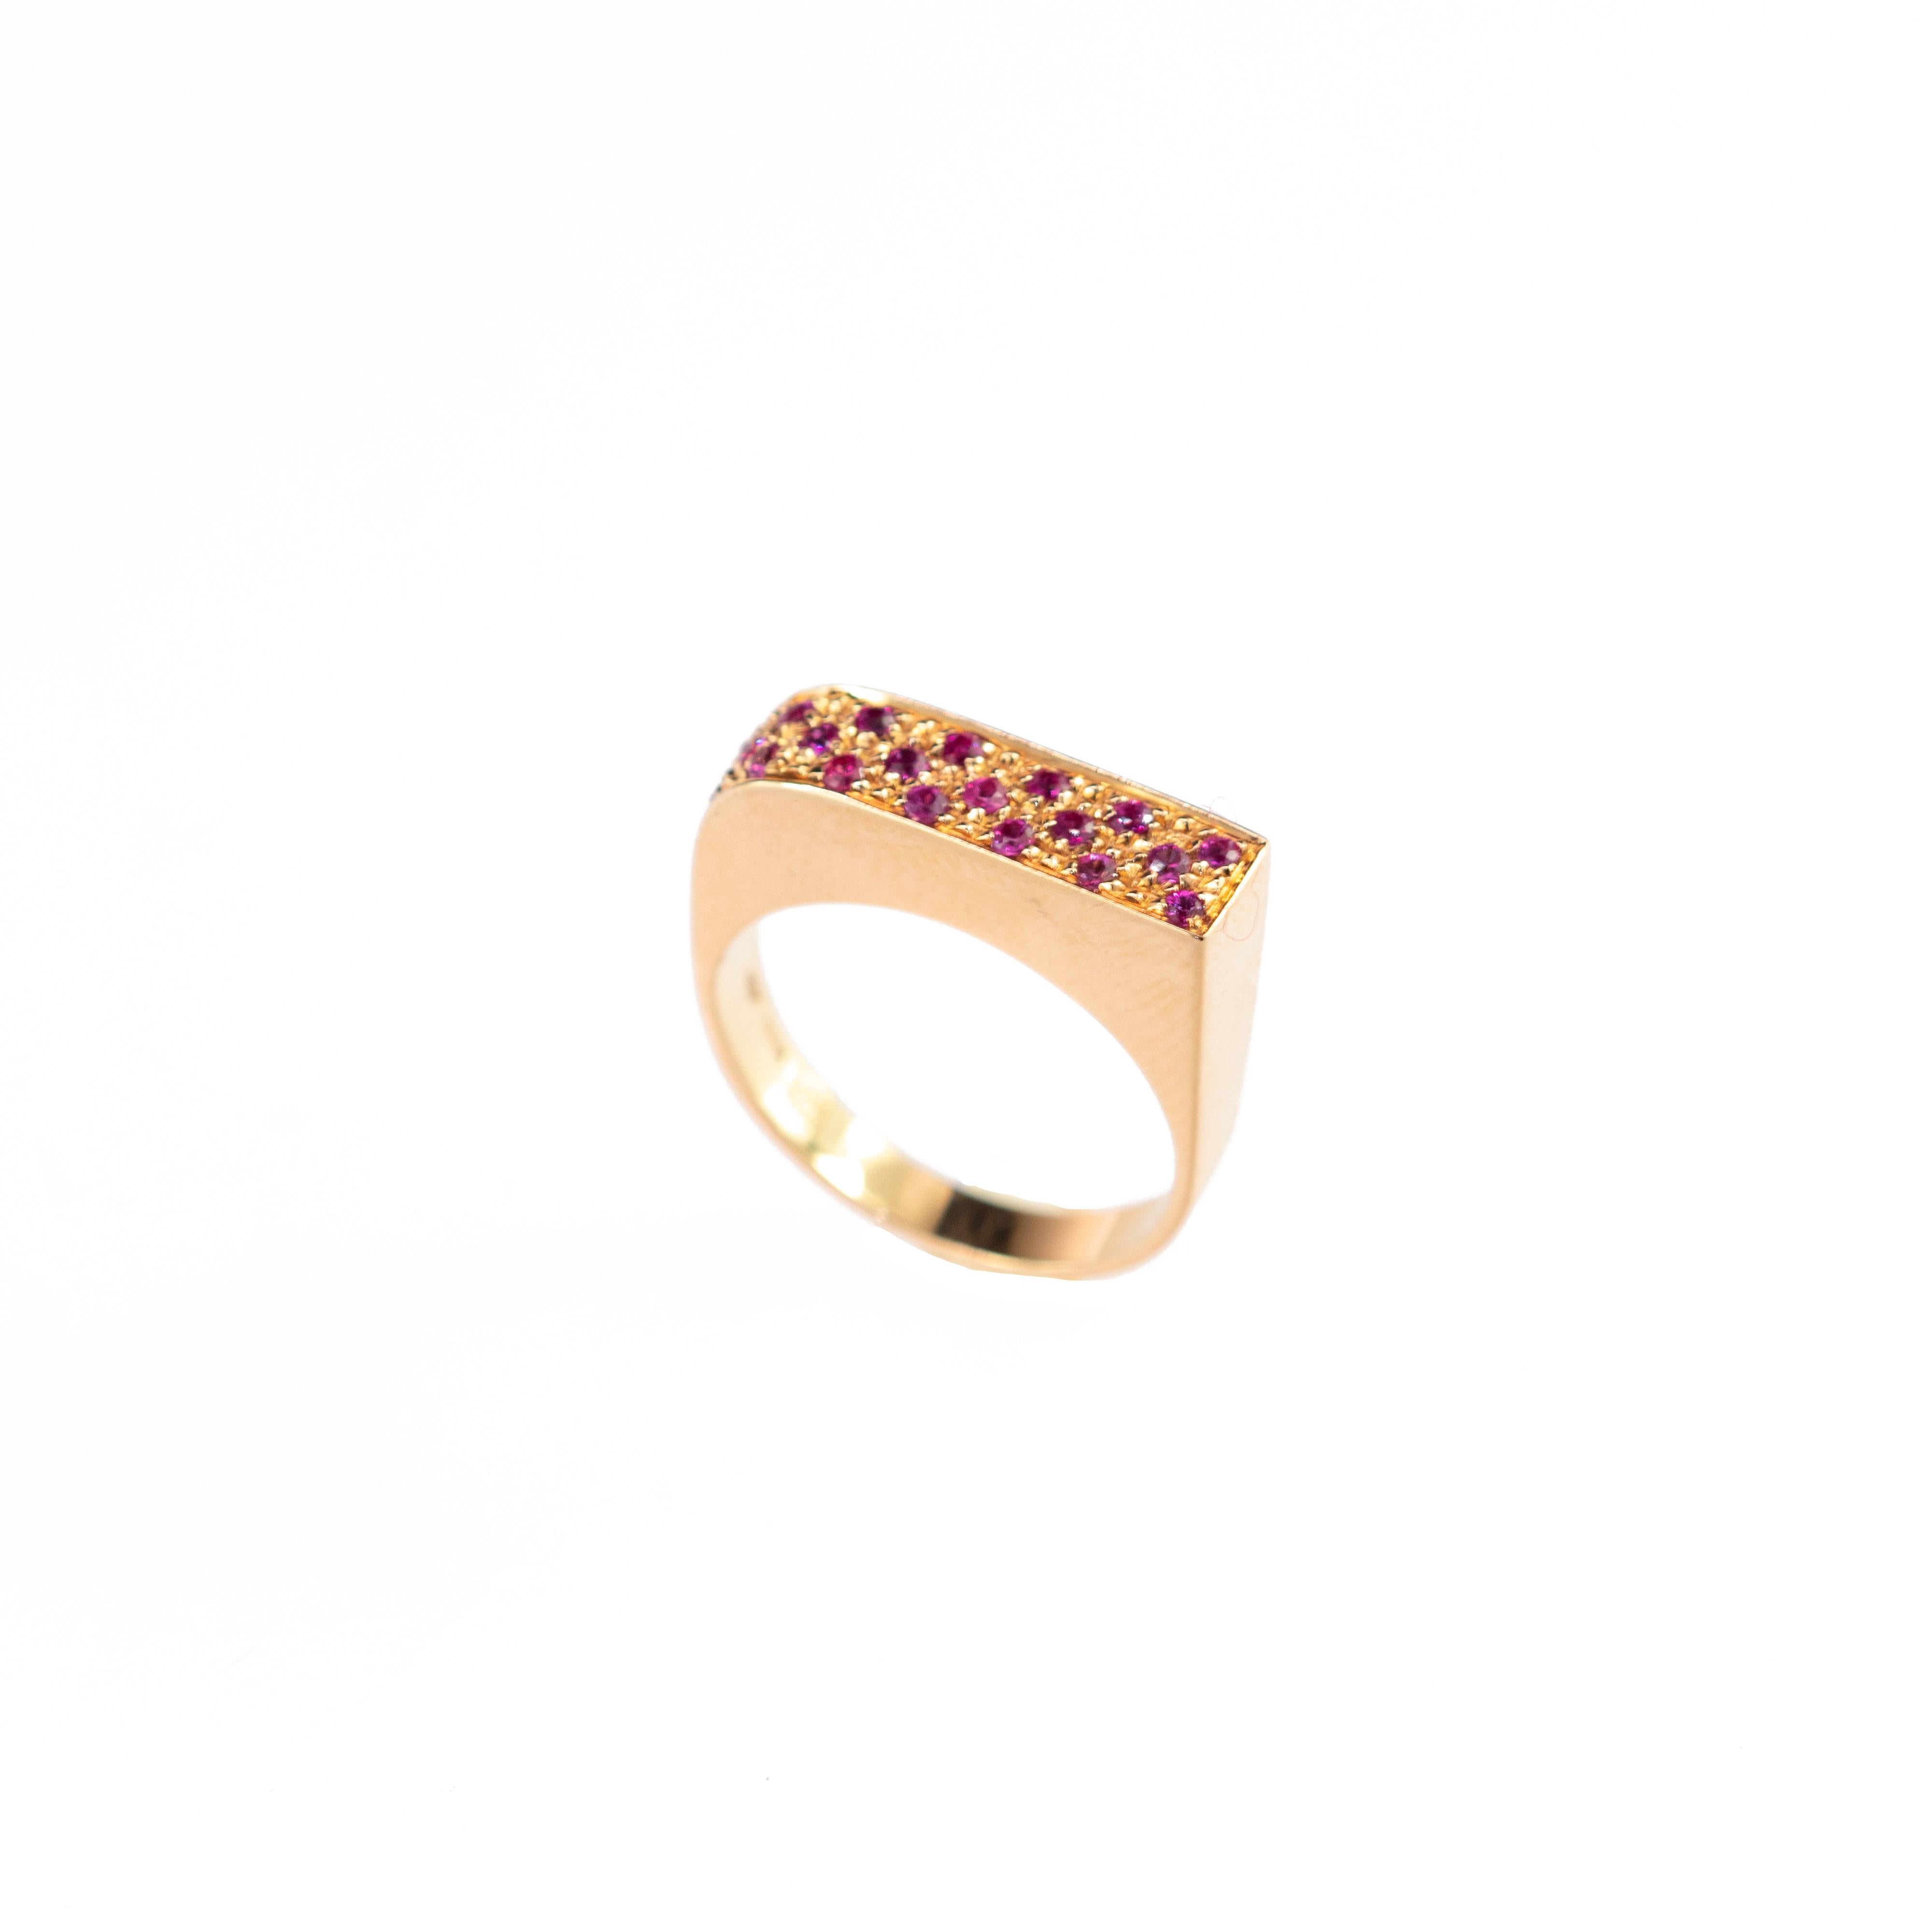 This sweet and exotic ring is inspired by the youth and delicacy of a young soul. The squared and circled off band of yellow gold design is made for a woman who likes to be different. A jewel energized not only by the pavè of purple and pink